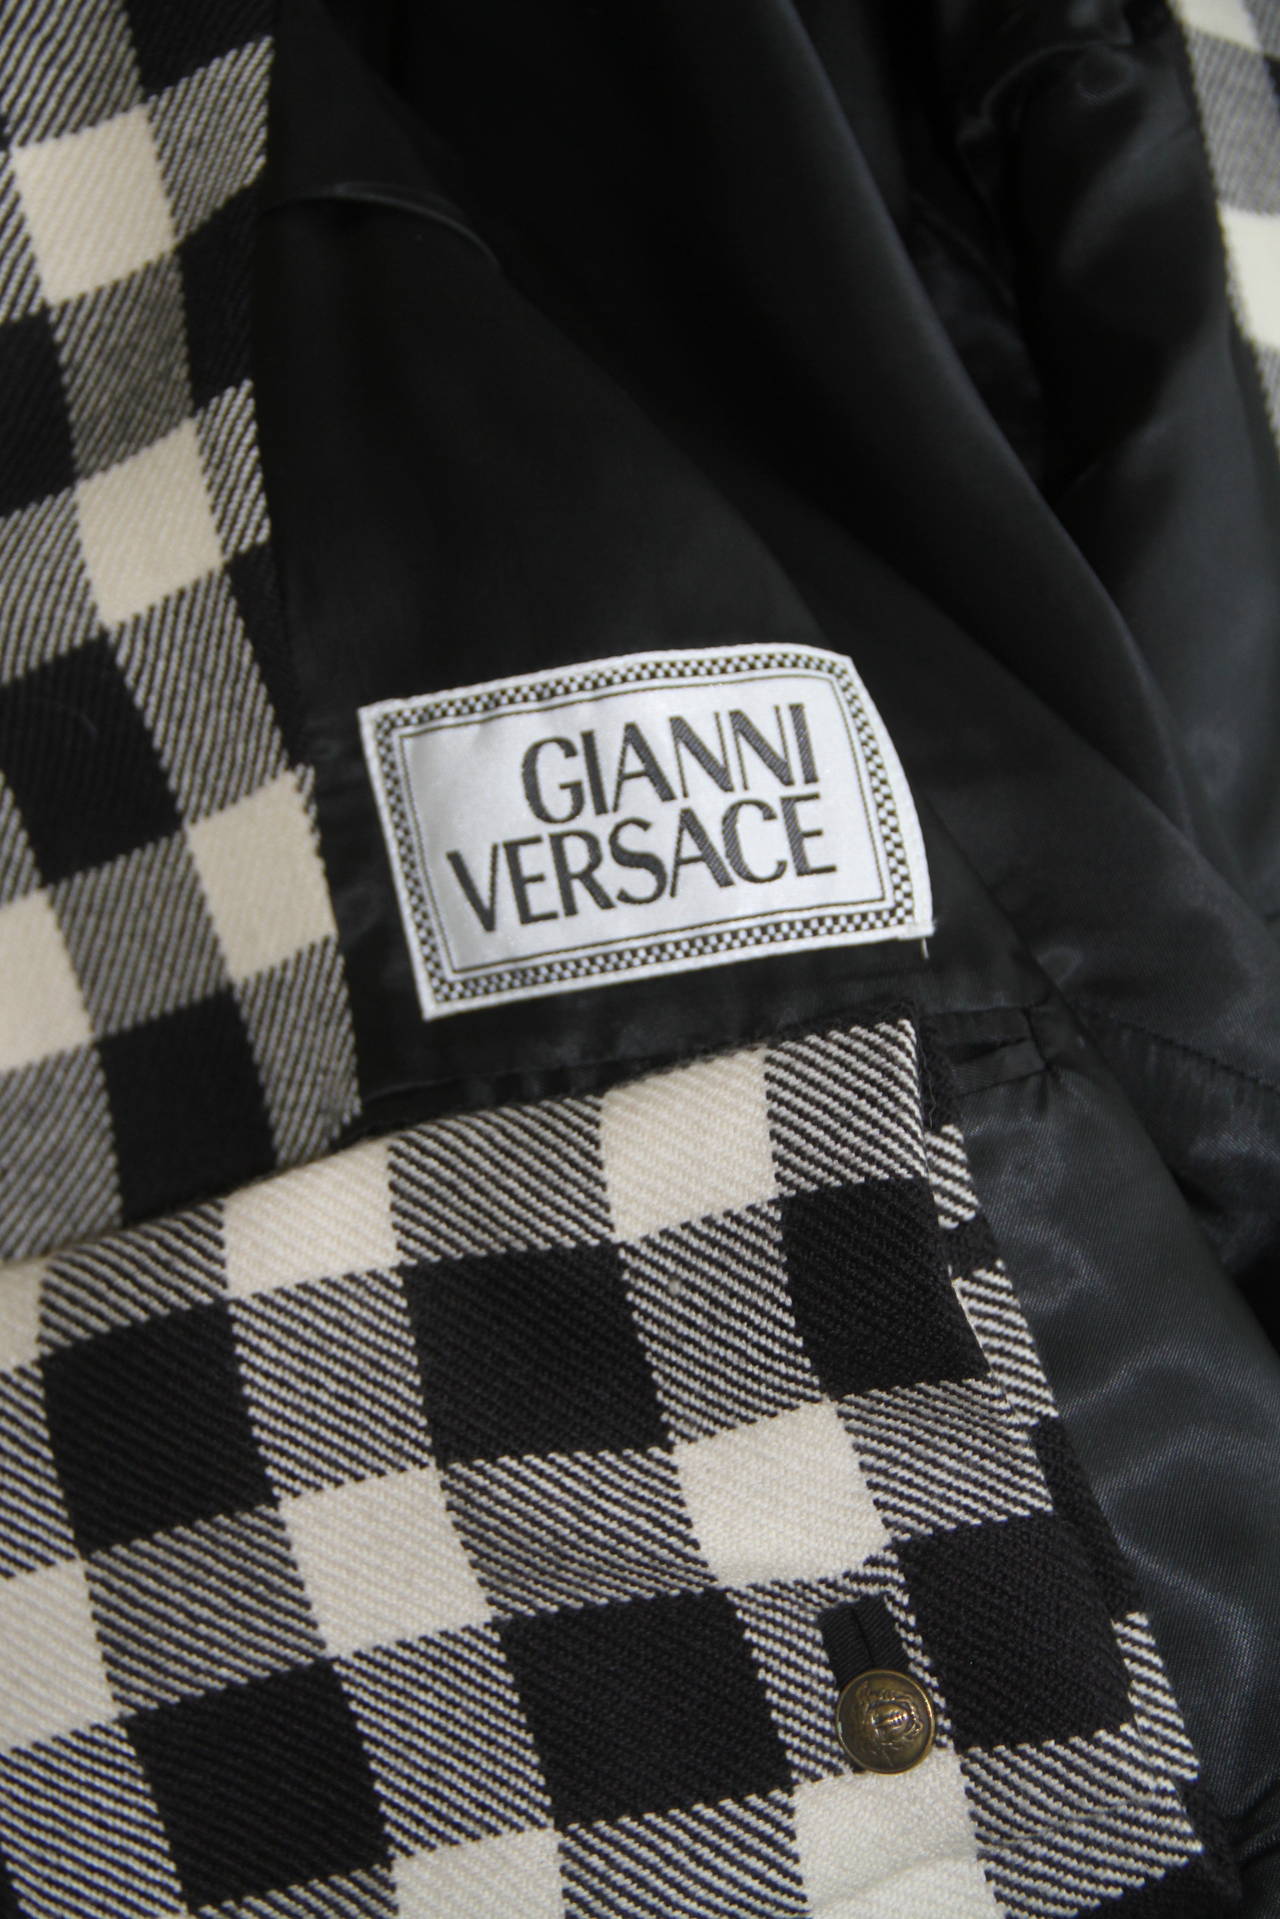 A rare Gianni Versace black and white checked jacket with suede collar from the Fall 1992 Men's Bondage collection.

Marked an Italian size 48.

Manufacturer - Alias S.p.a.

Fabric content - 100% wool with suede application